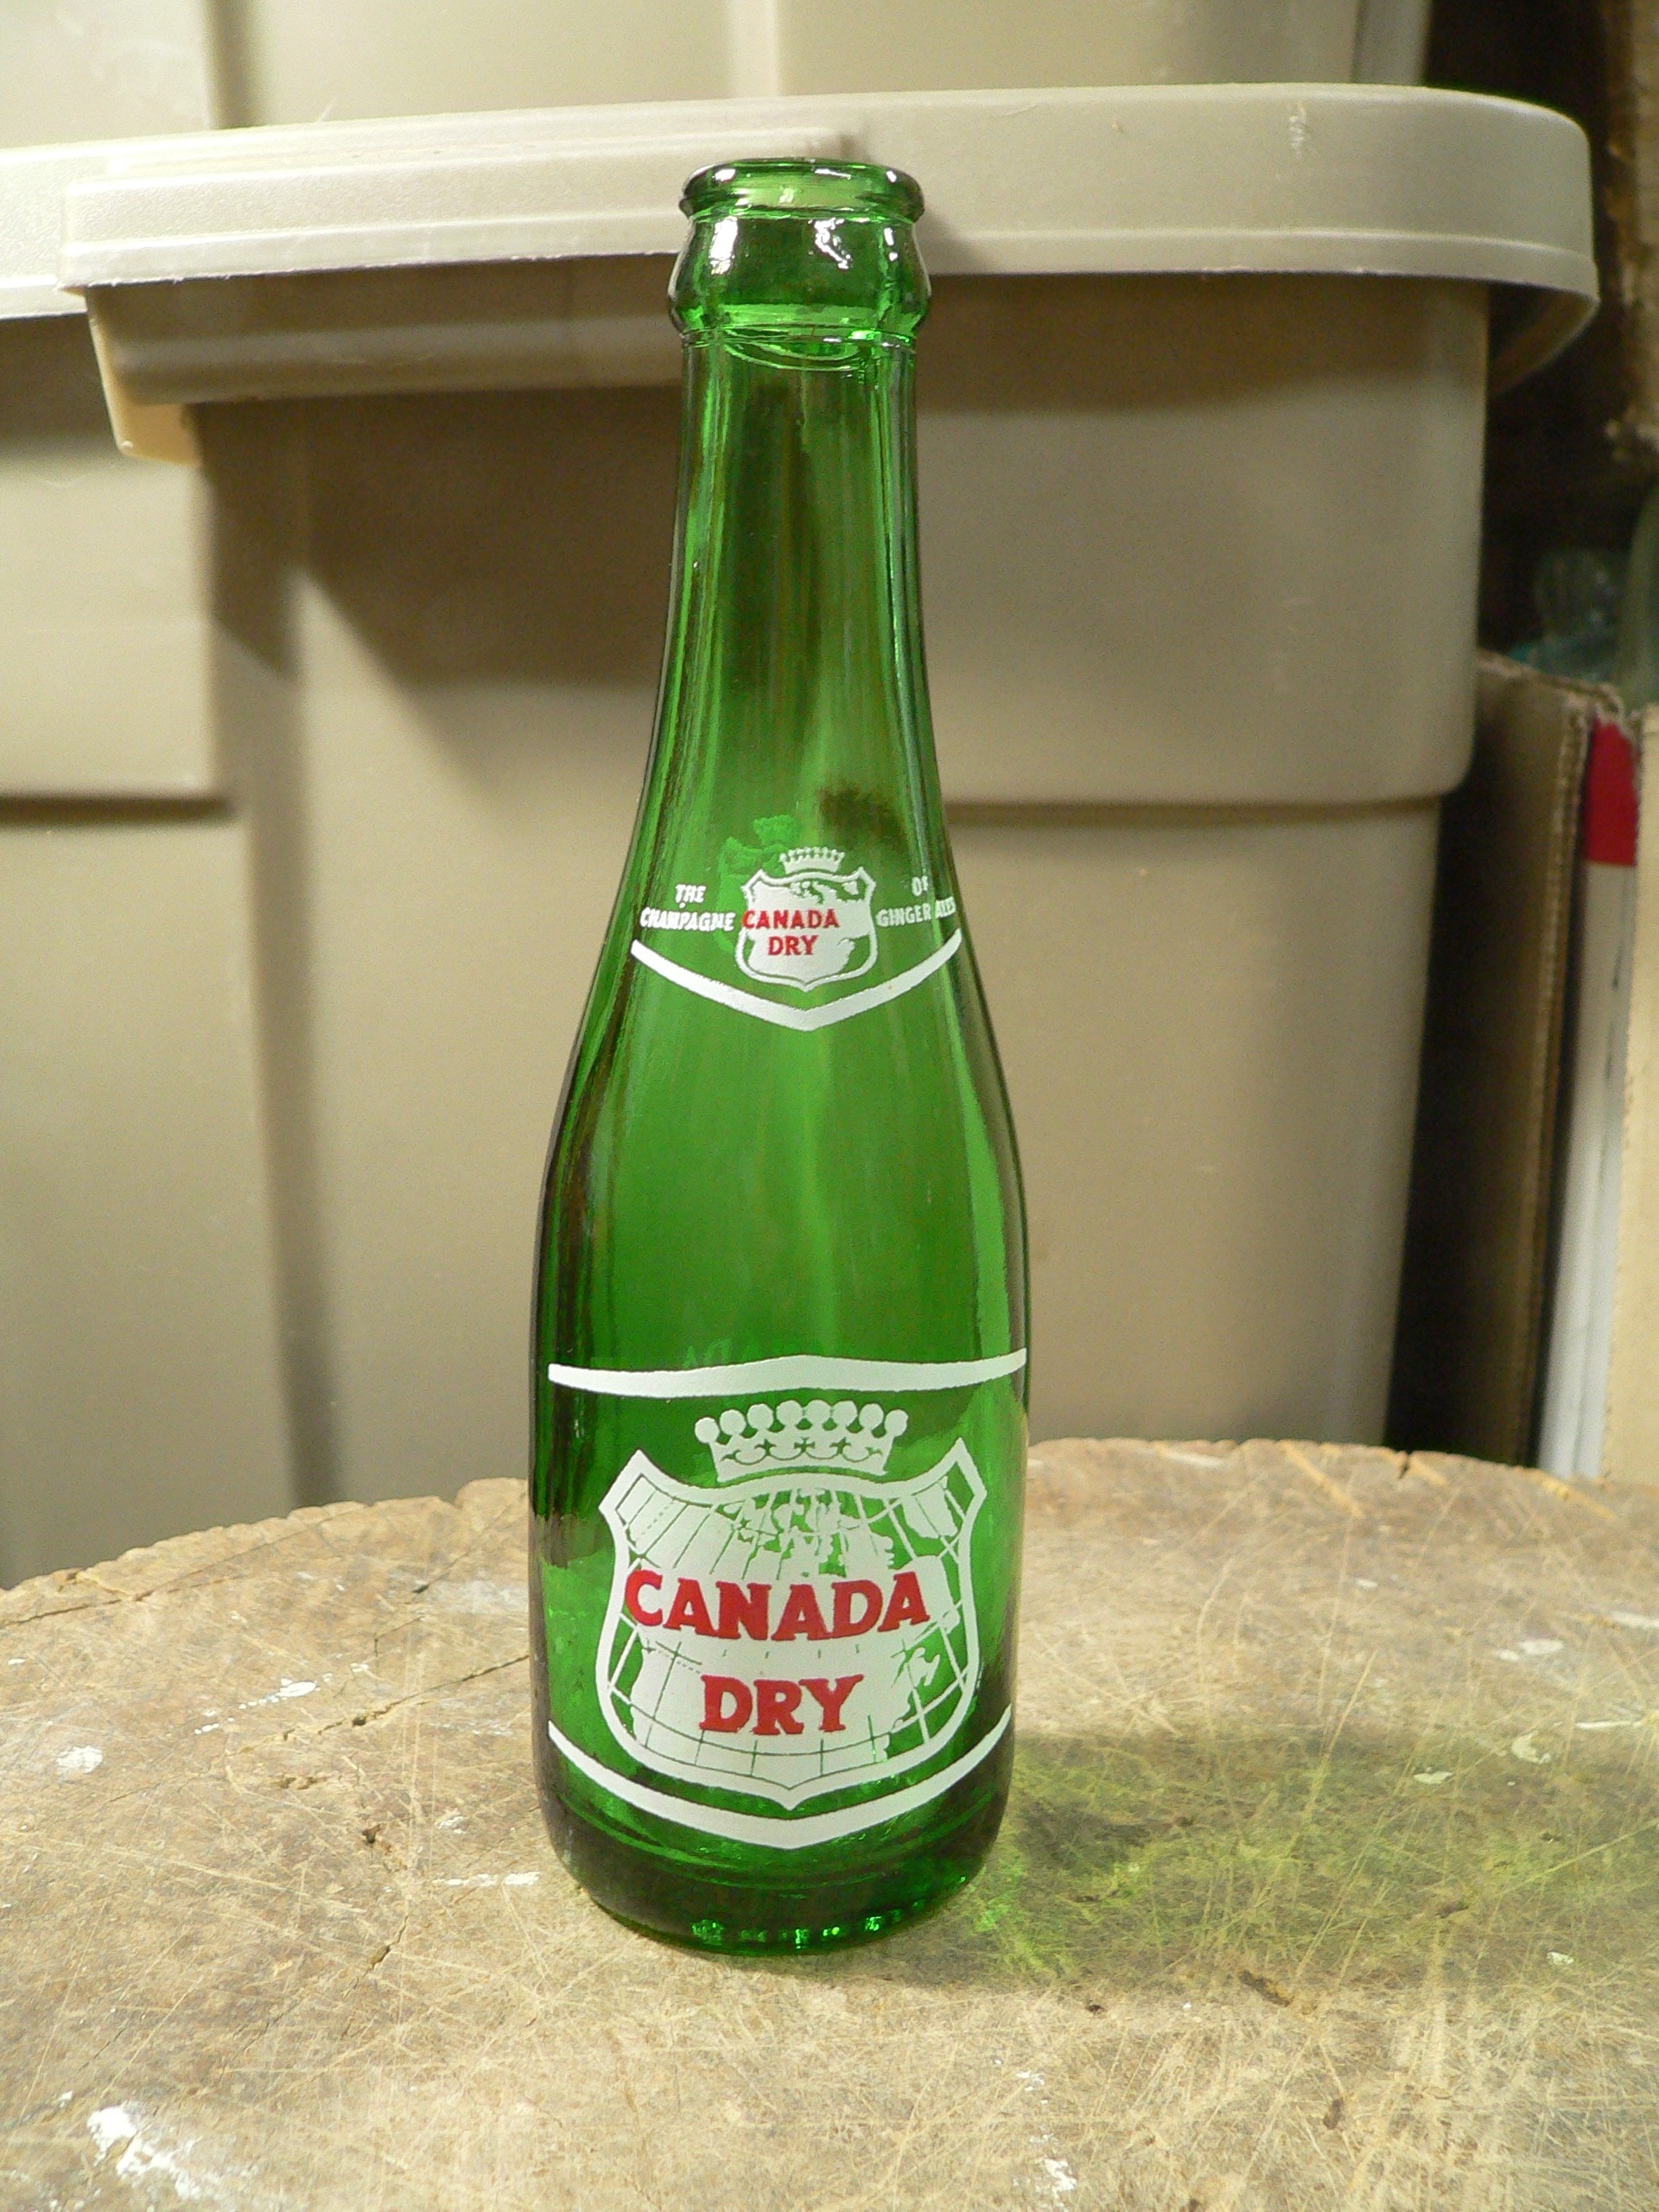 Bouteille antique canada dry # 7887.4